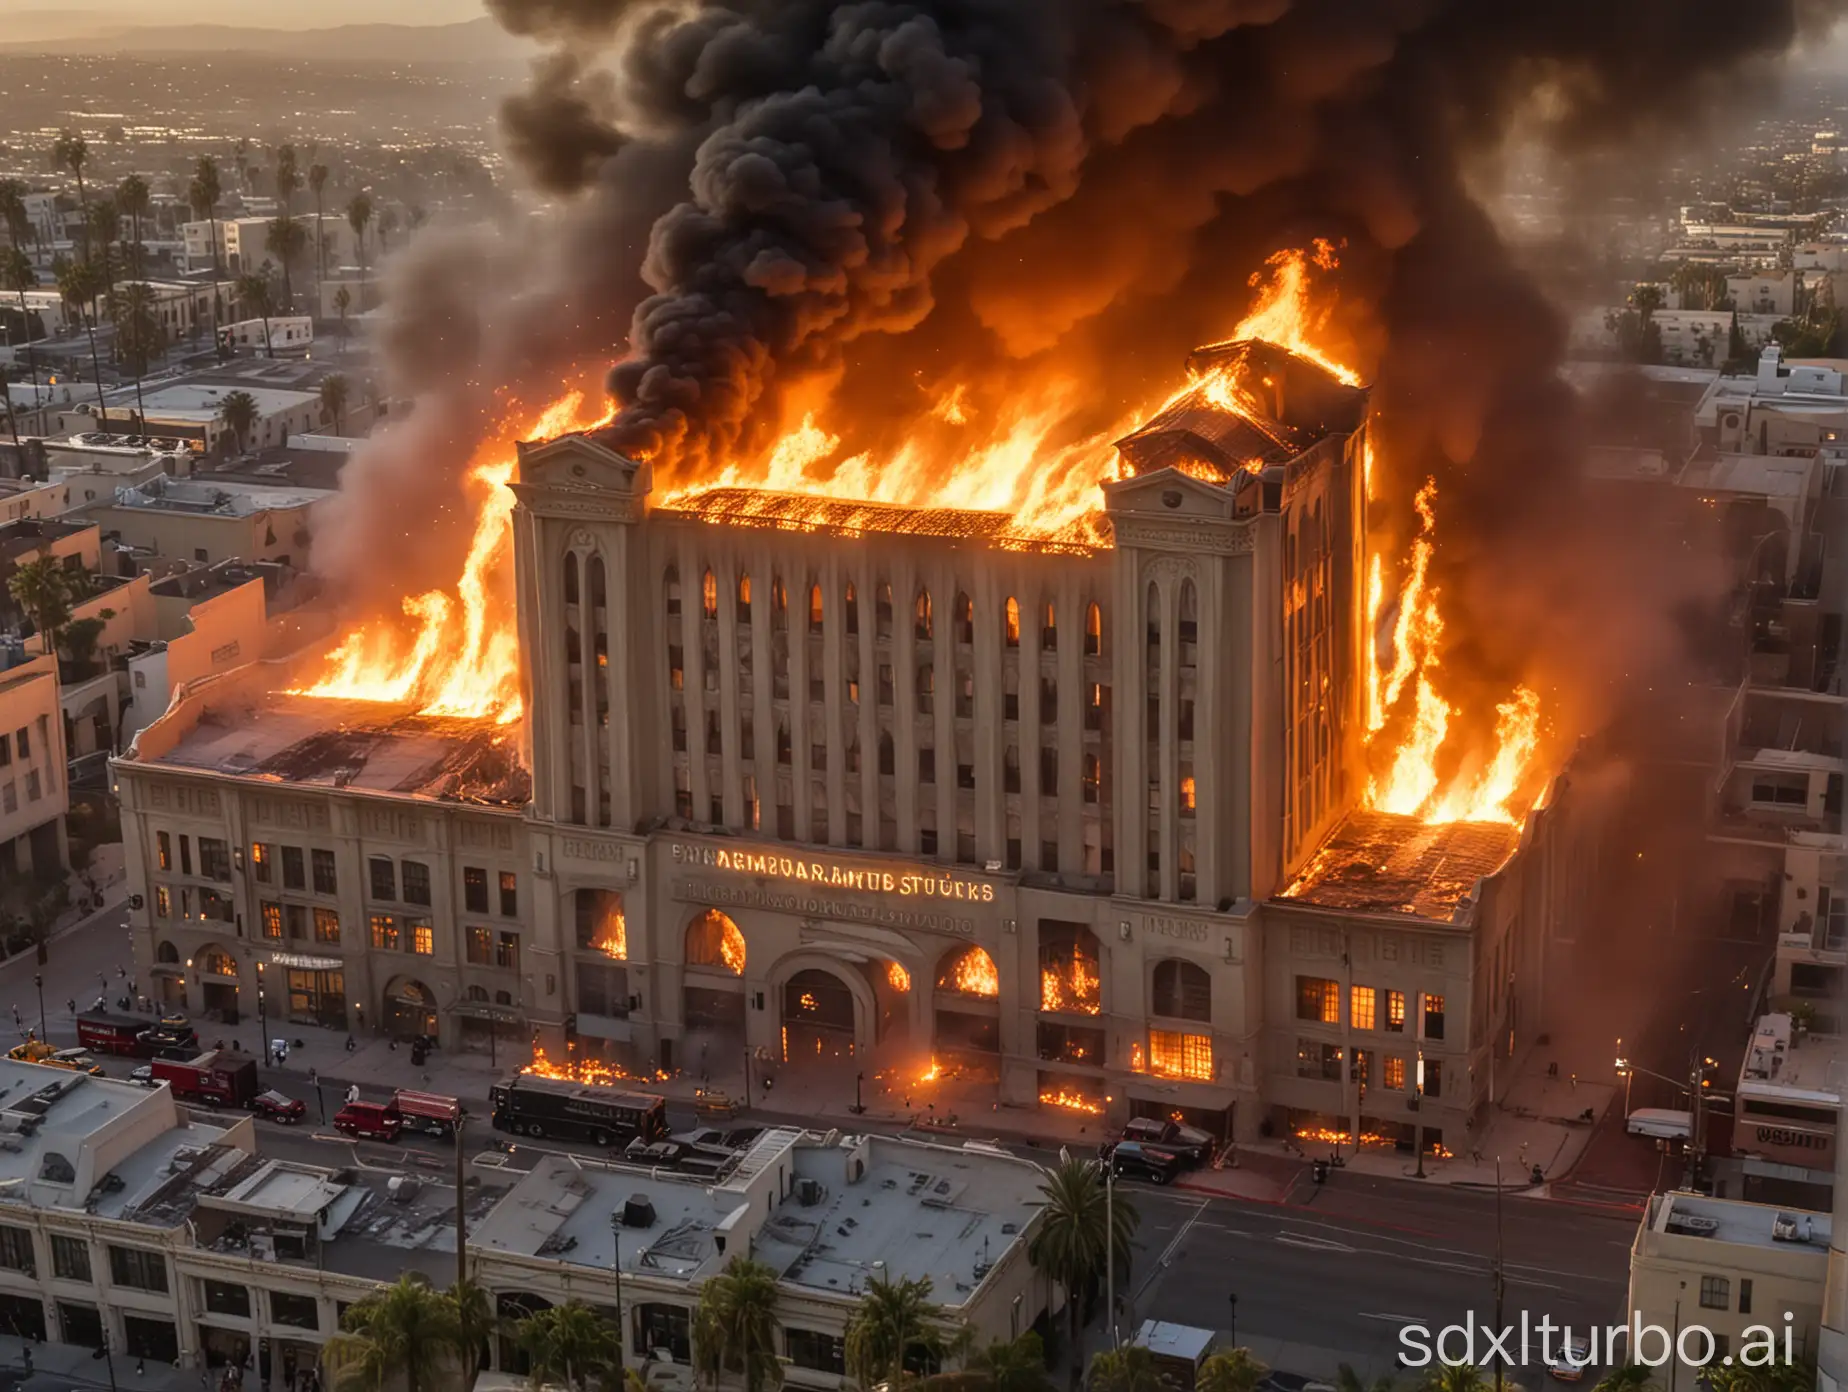 Paramount studios on fire, smoke and flames